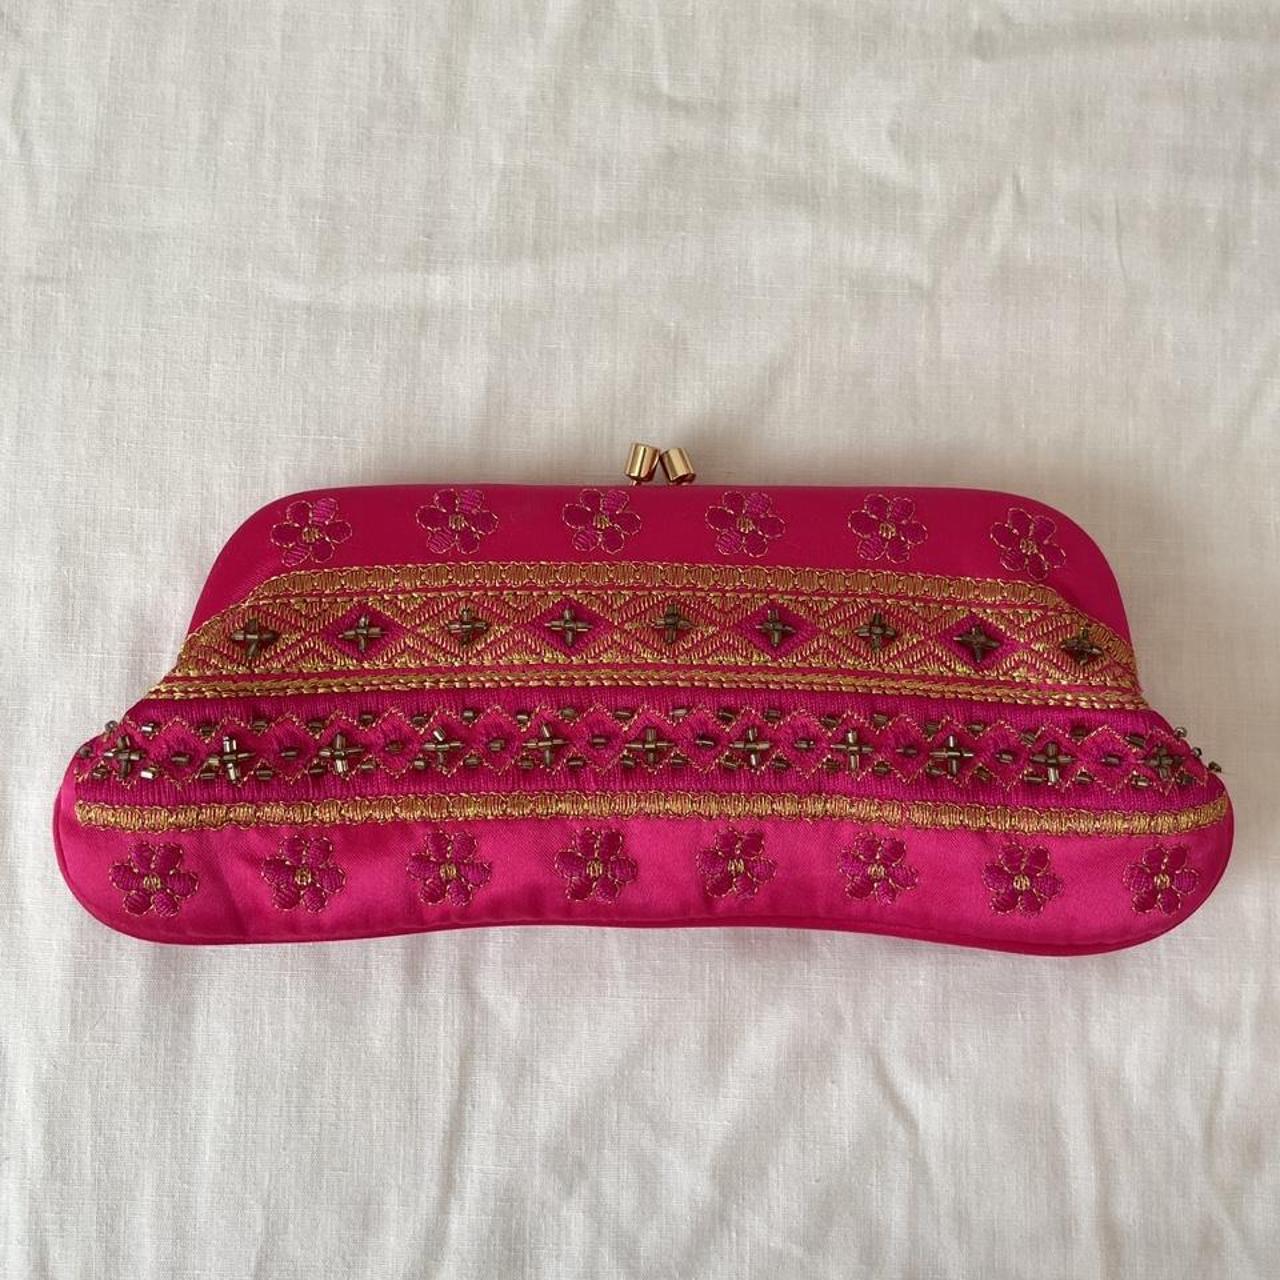 Product Image 3 - Embroidered hot pink satin clutch